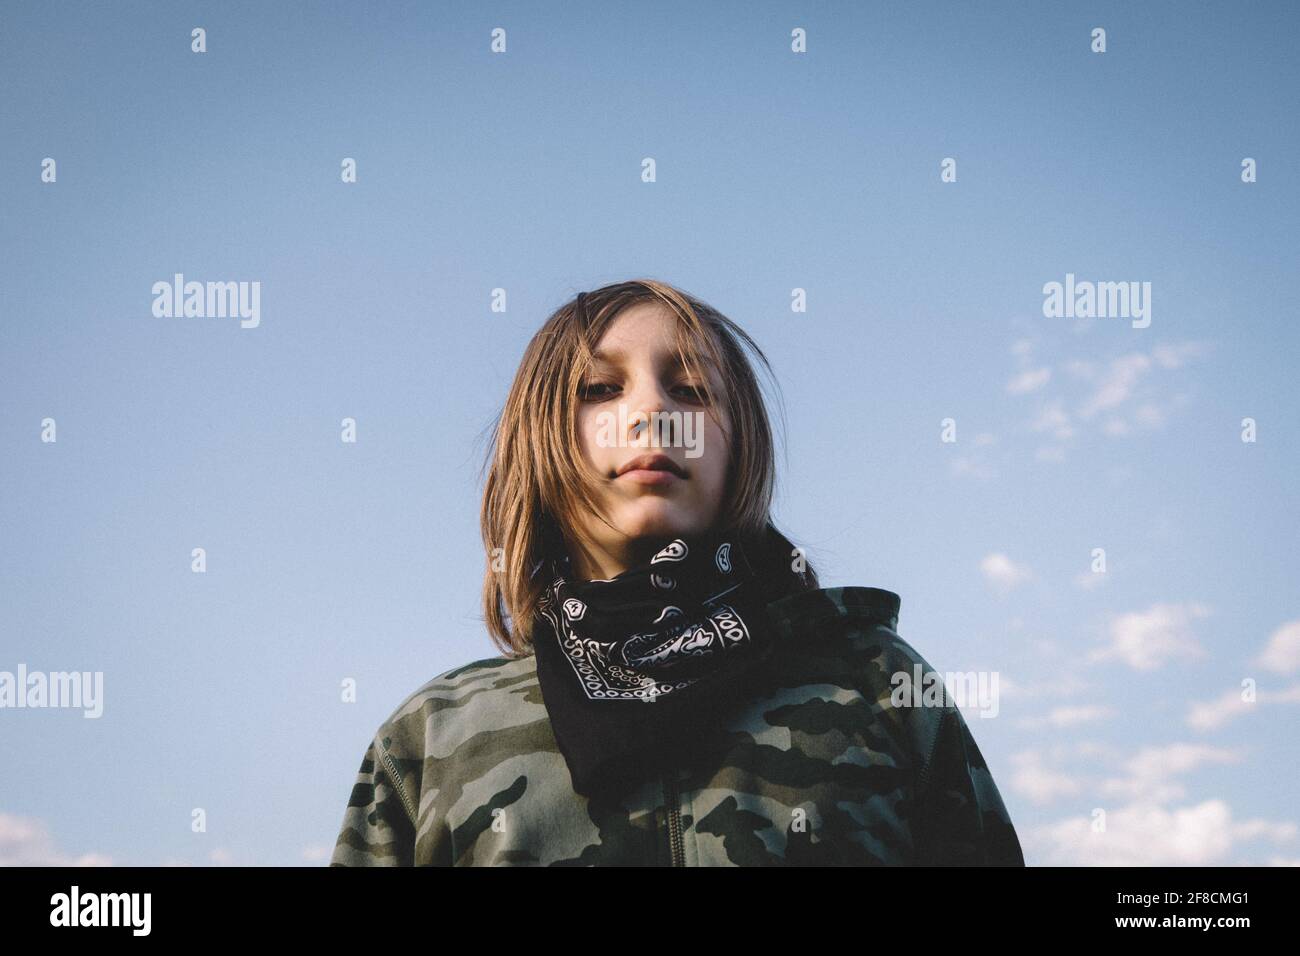 Boy in Camouflage Hoodie and Bandana Against the Open Blue Sky Stock Photo